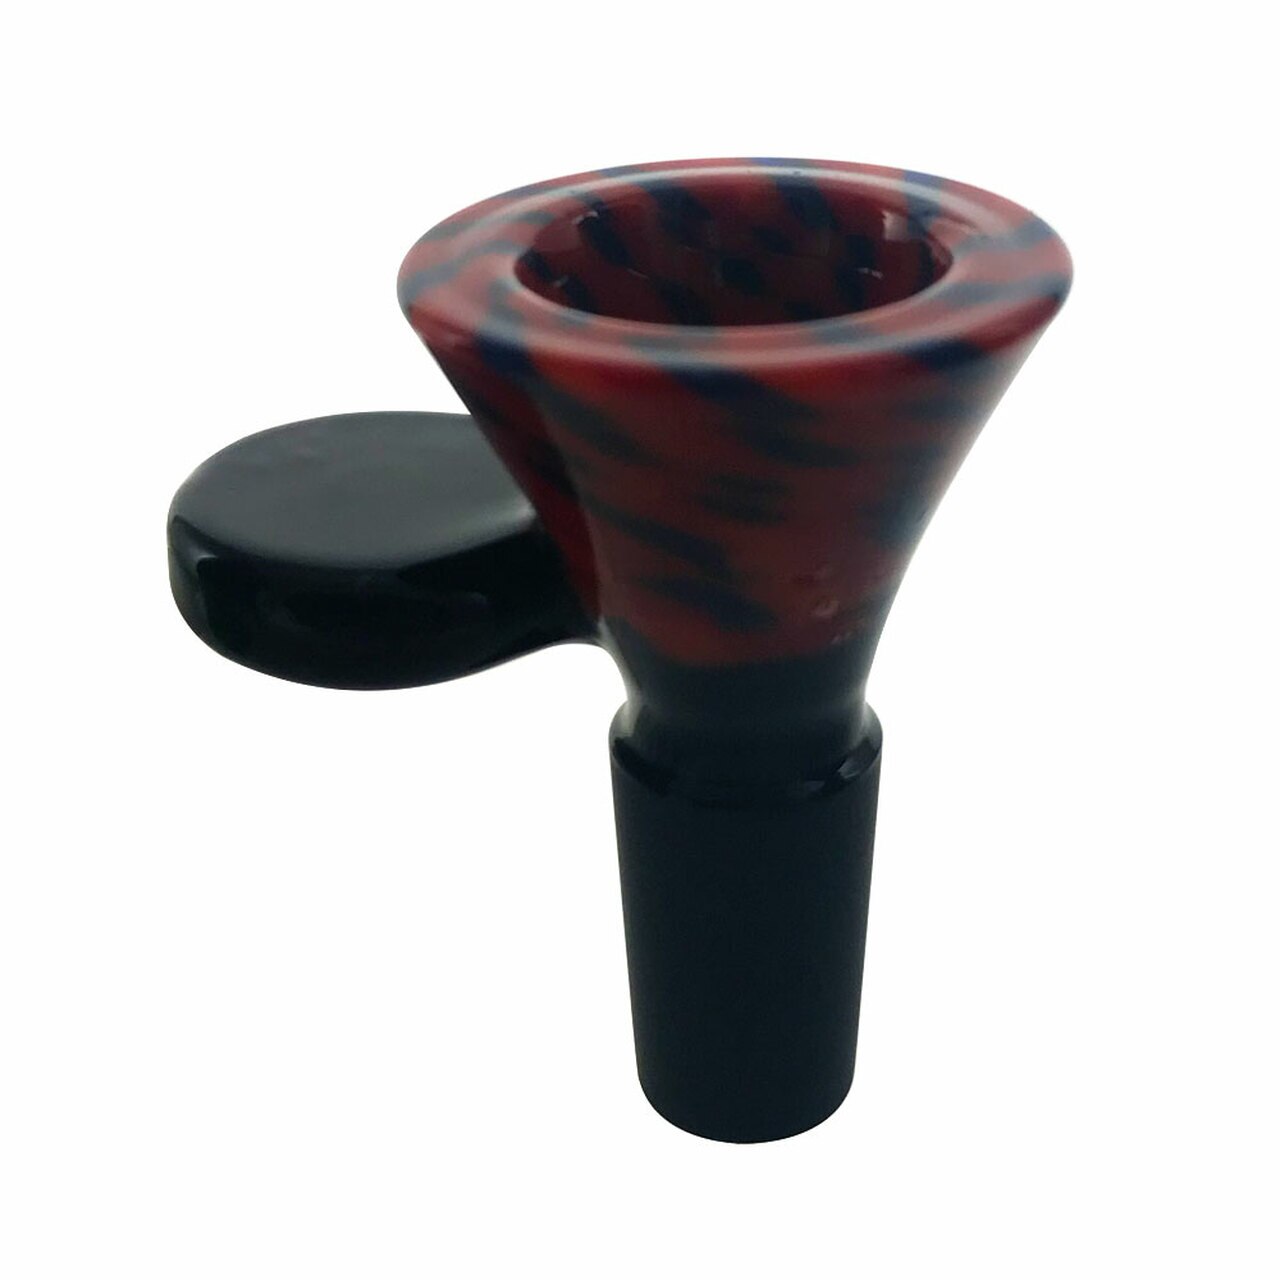 Red and Black Bowl with Handle. Headshop Vancouver Canada.